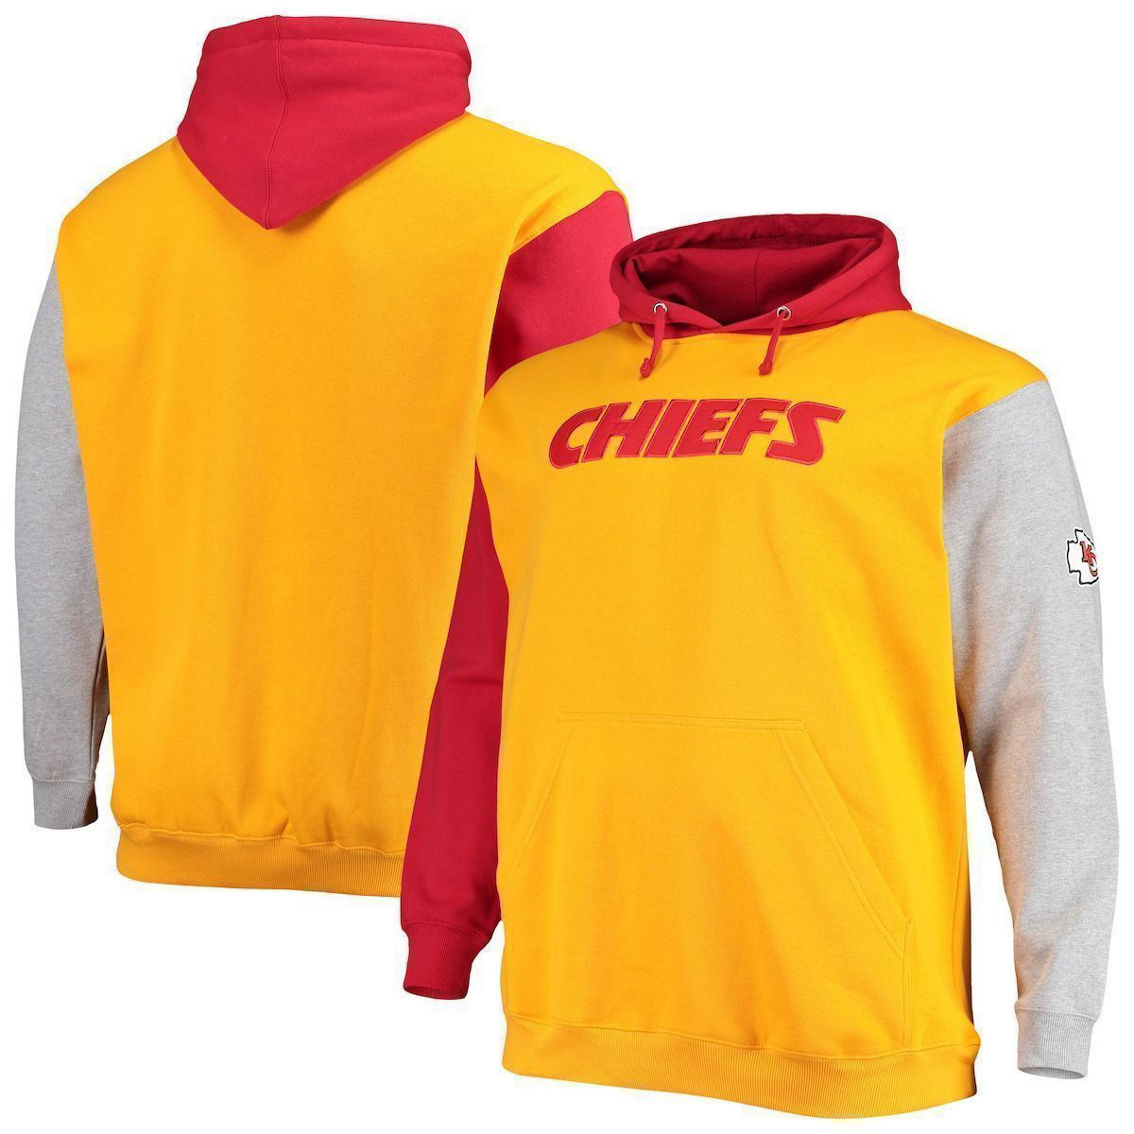 Fanatics Branded Men's Red/Yellow Kansas City Chiefs Big & Tall Pullover Hoodie - Image 2 of 4